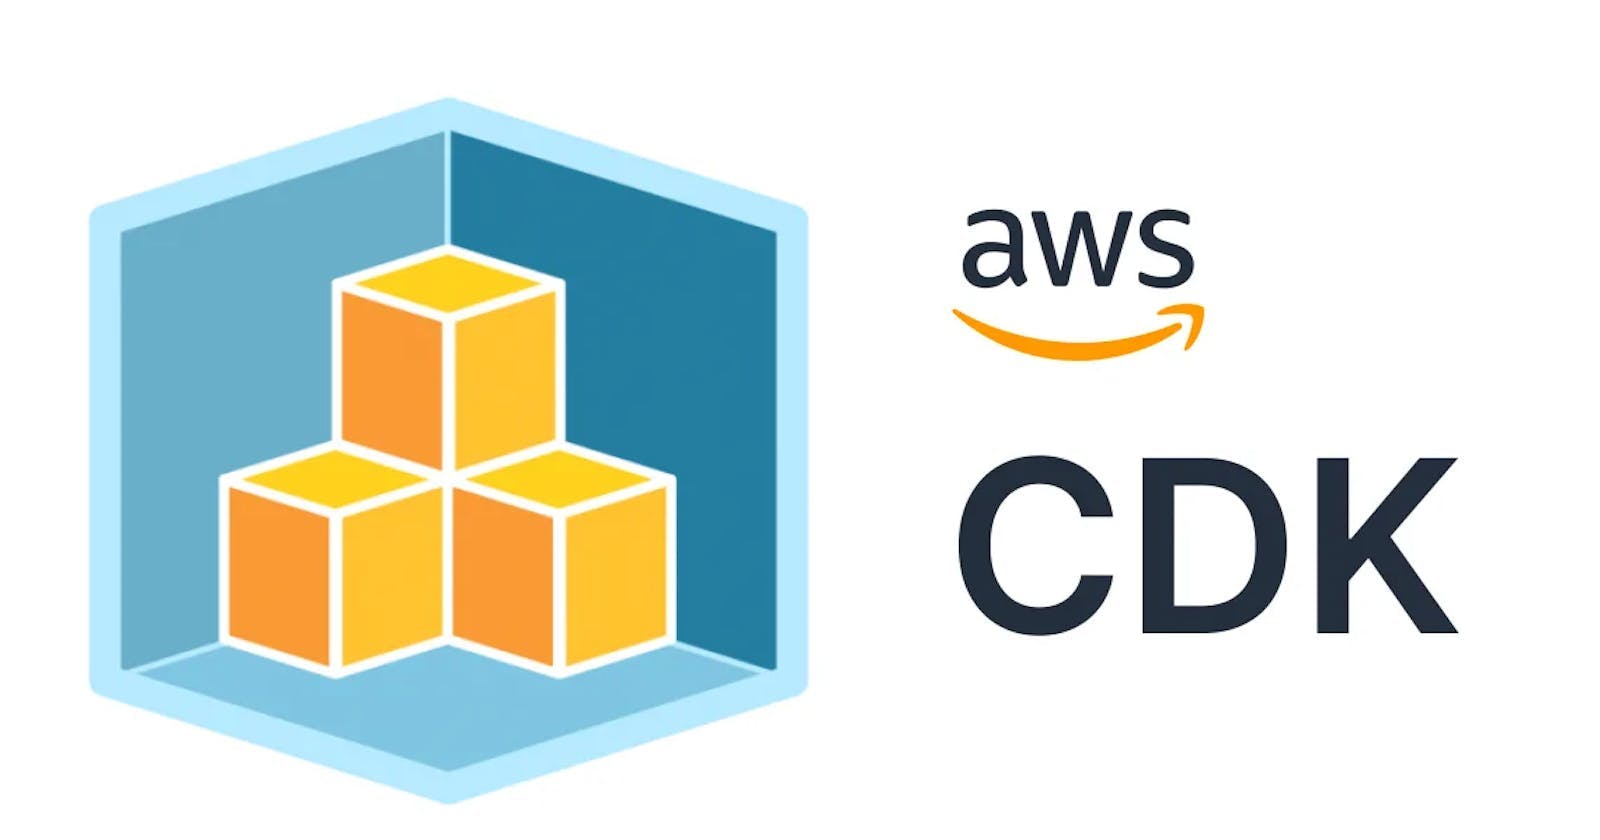 How to send emails with SES in AWS CDK